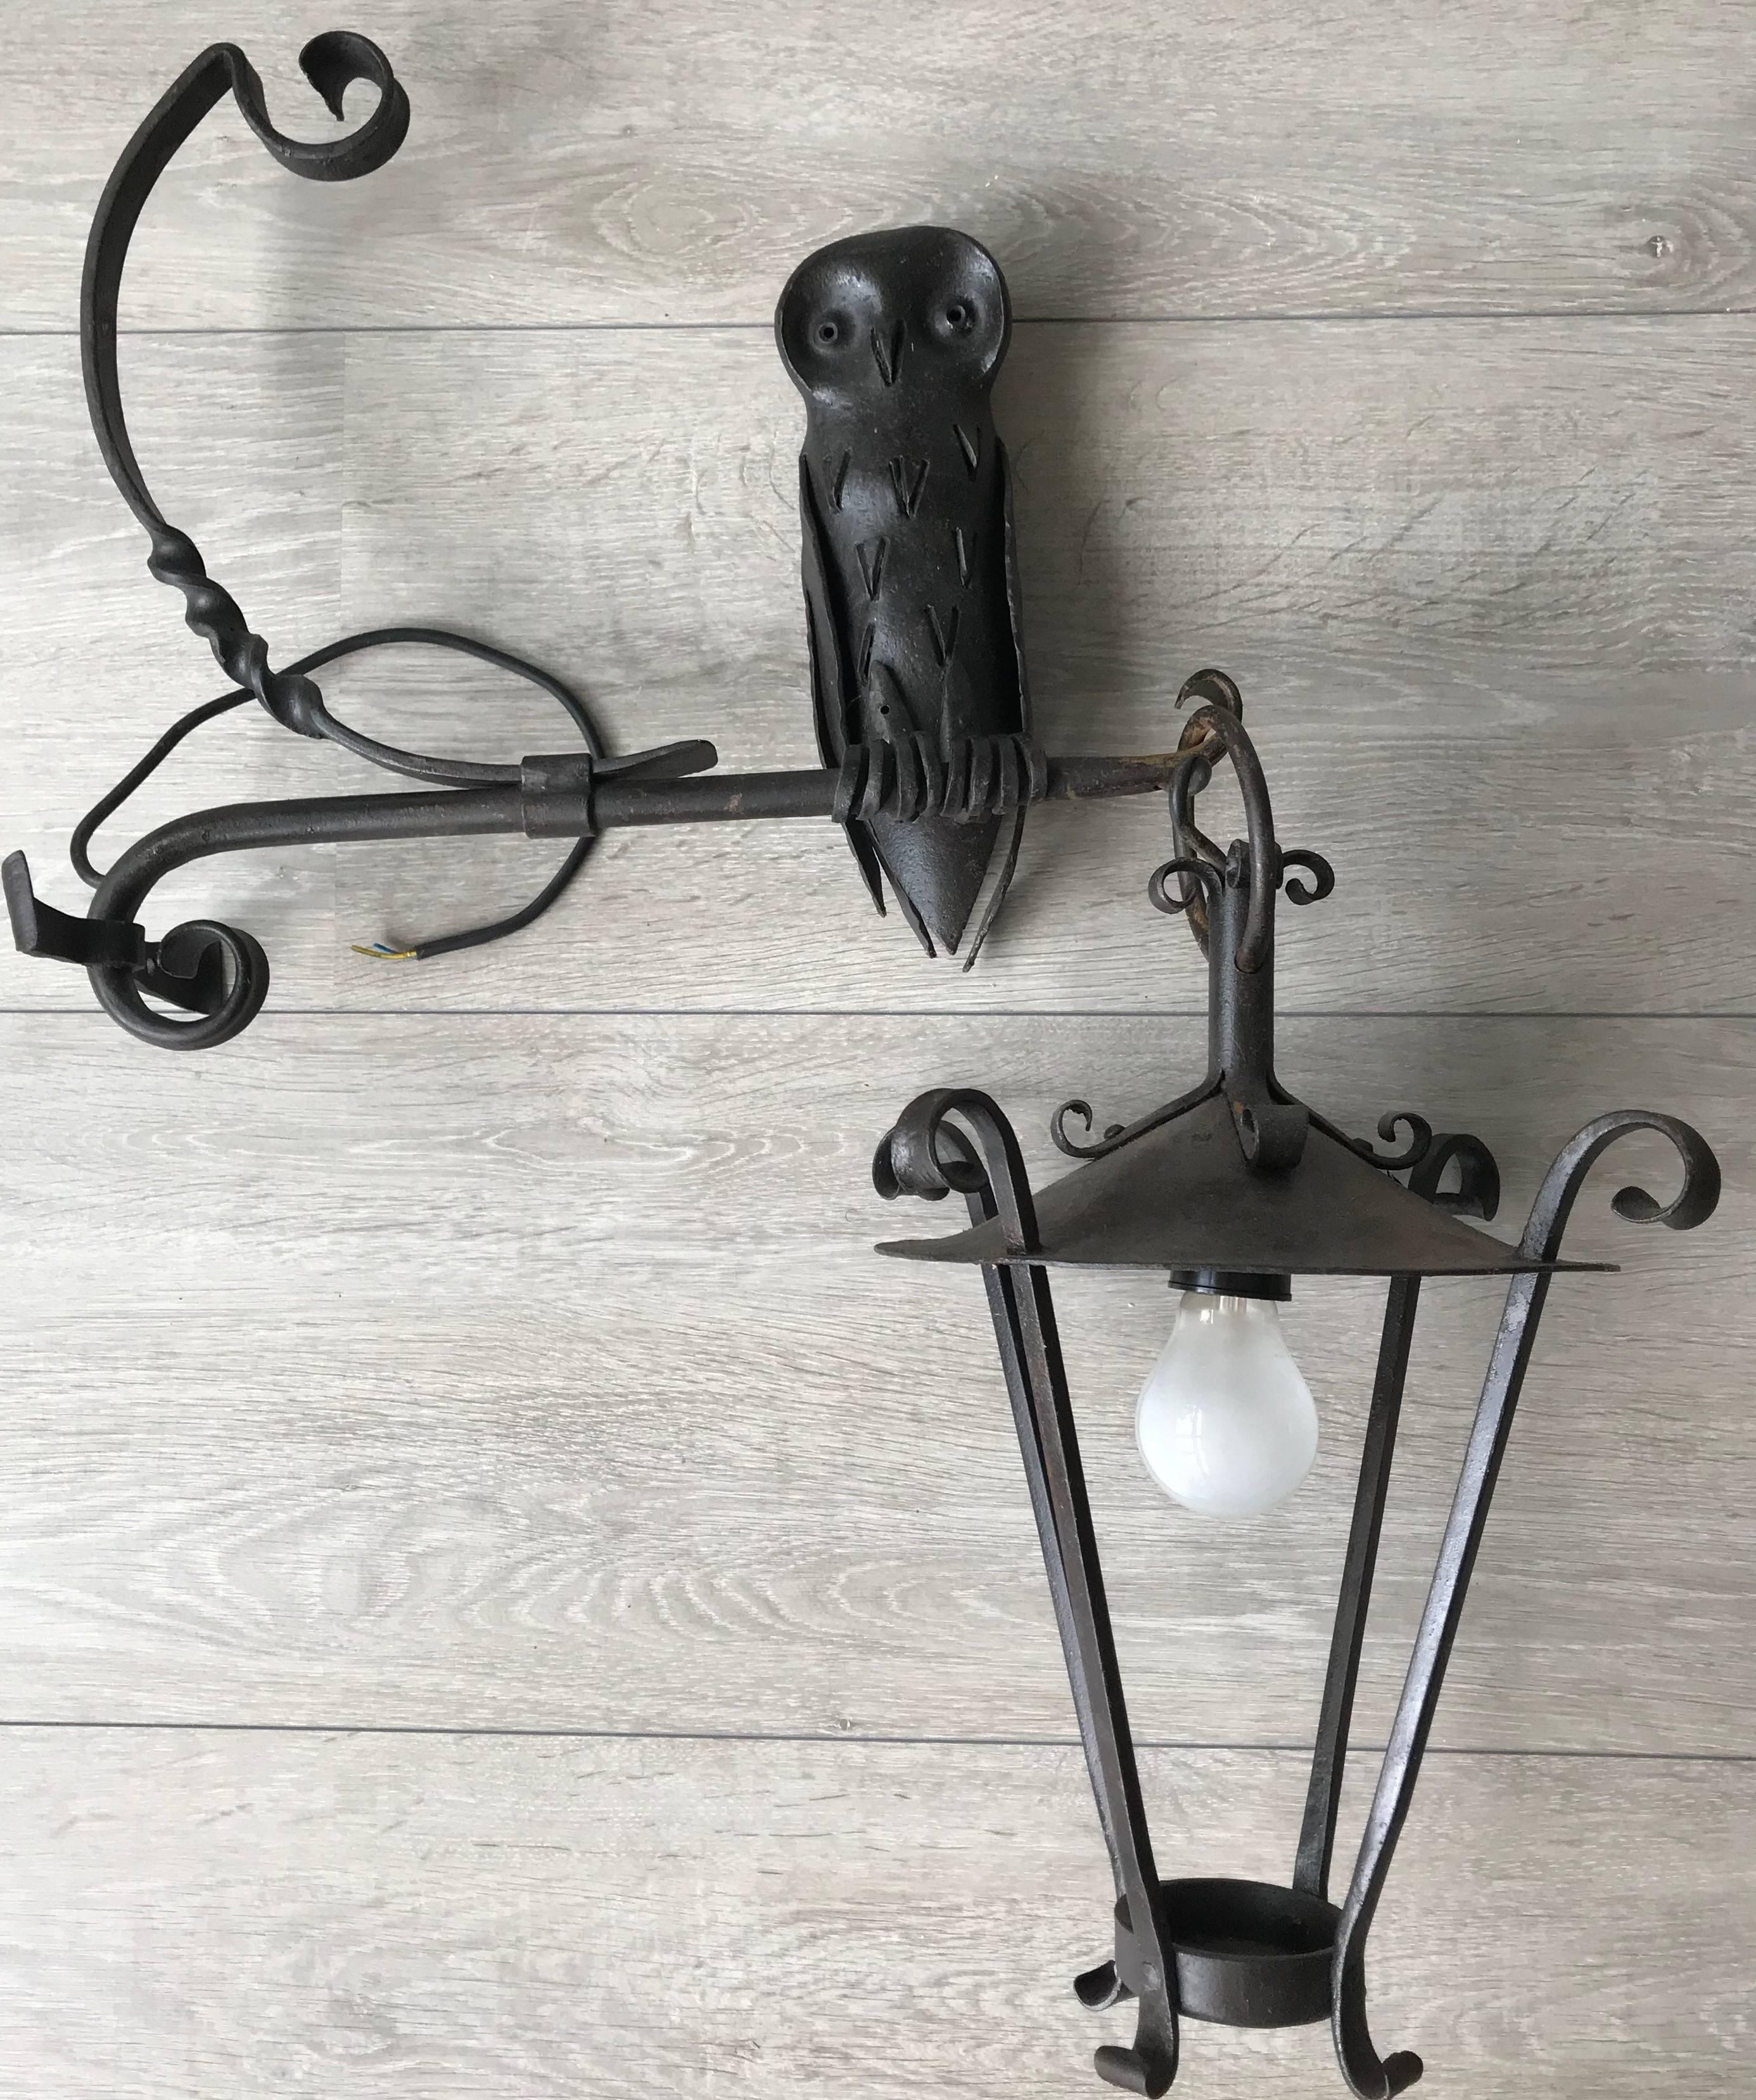 Handcrafted and unique outdoor wall lantern with sculpture.

This all-handcrafted work of lighting art is the only one of its kind and it is in amazing condition. This mid-20th century made wall sconce comes with a beautiful and entirely hand-forged